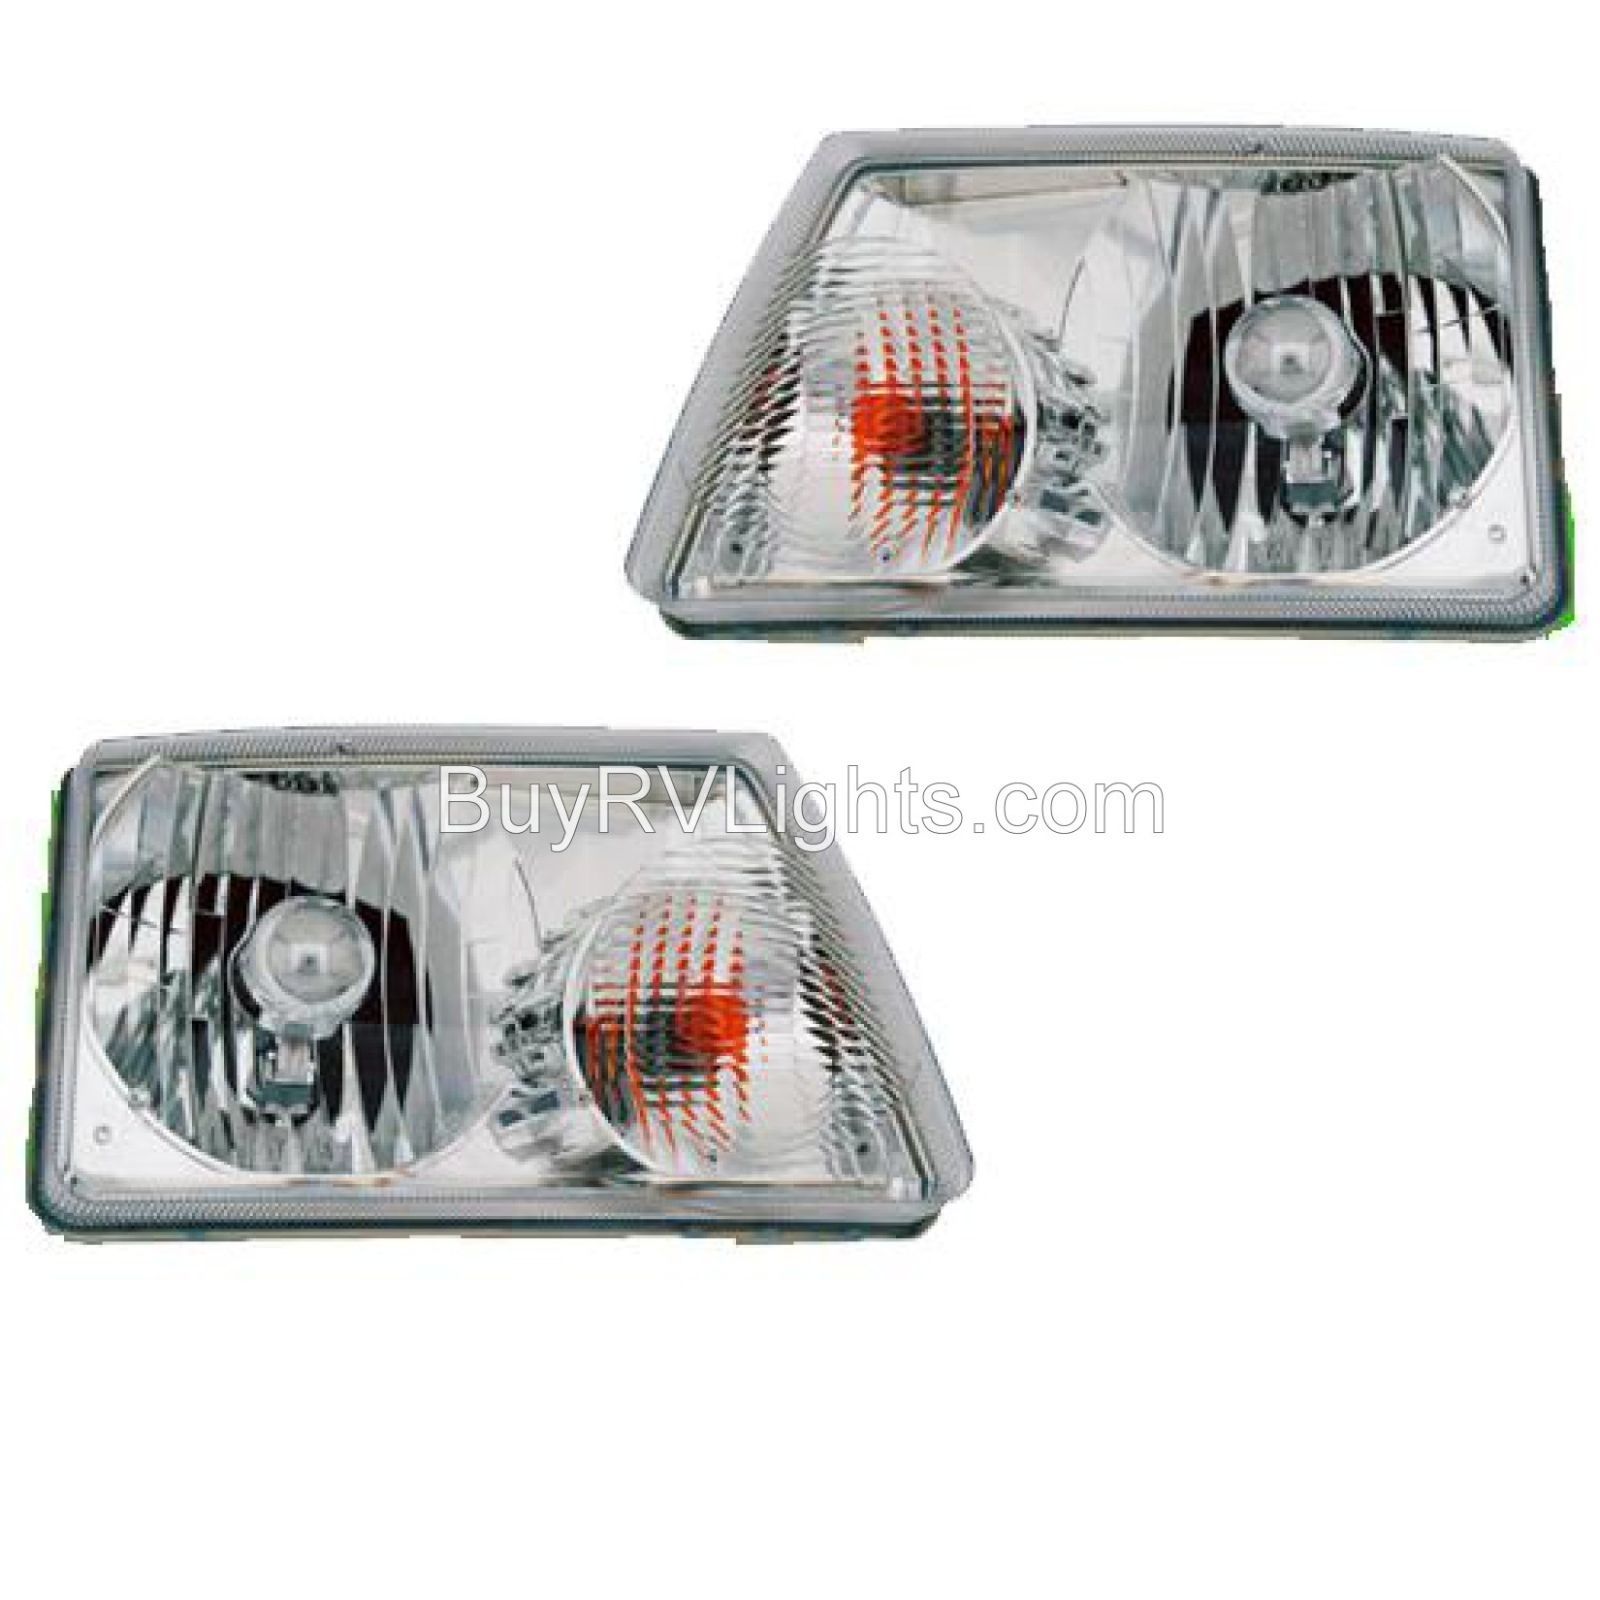 Primary image for ITASCA SUNSTAR 2013 2014 2015 PAIR SET HEADLIGHTS HEAD LIGHTS FRONT LAMPS RV